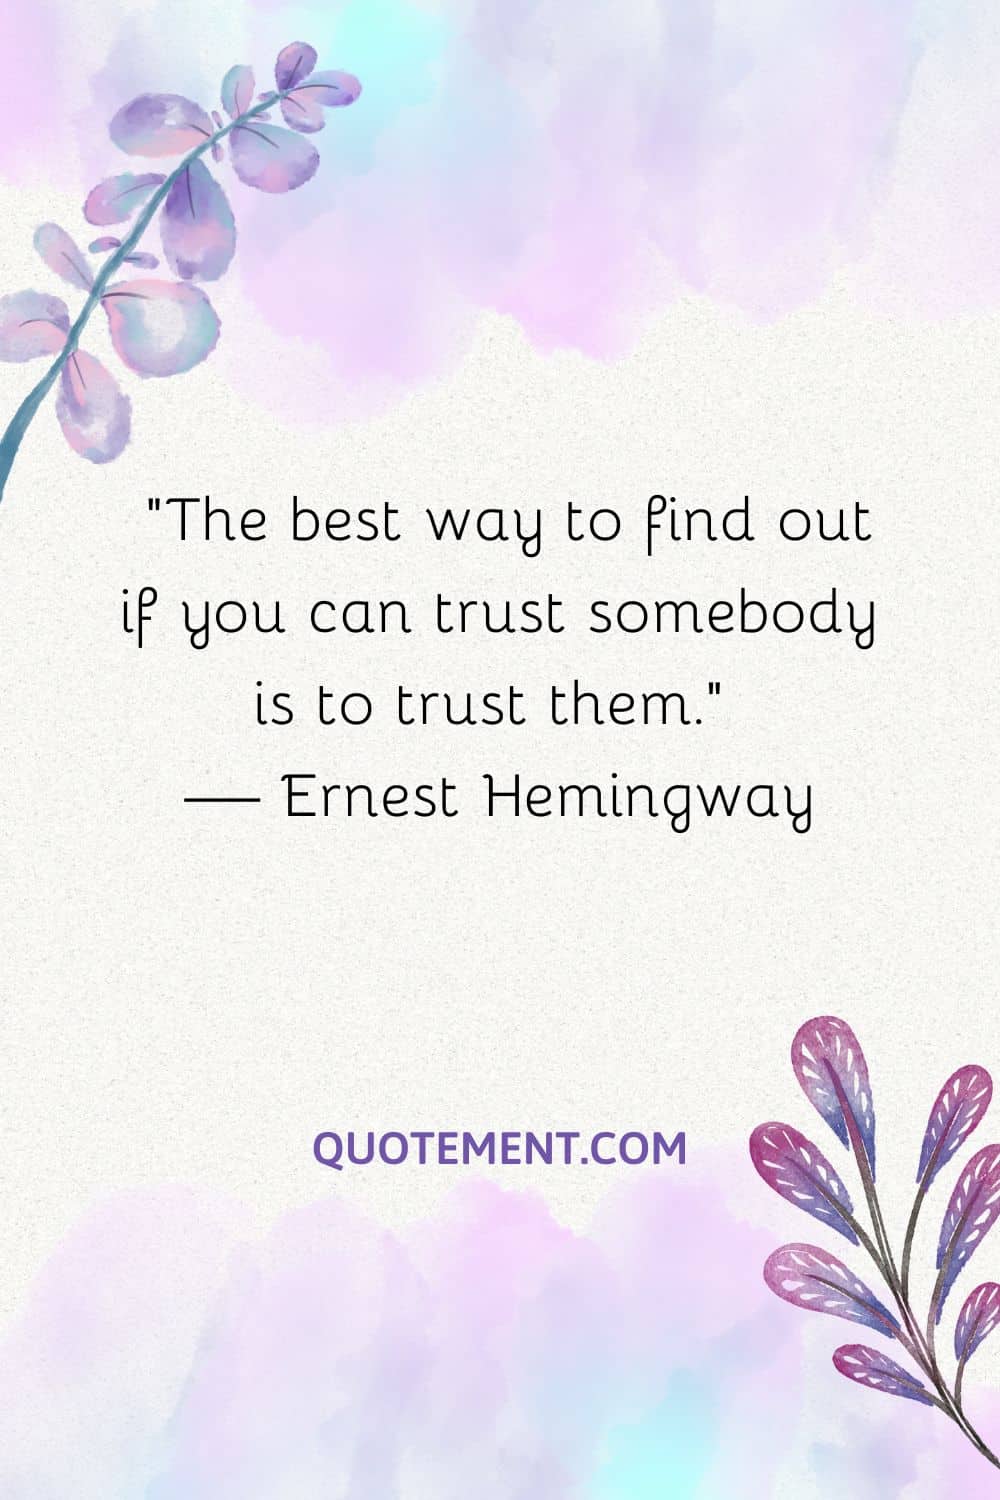 The best way to find out if you can trust somebody is to trust them